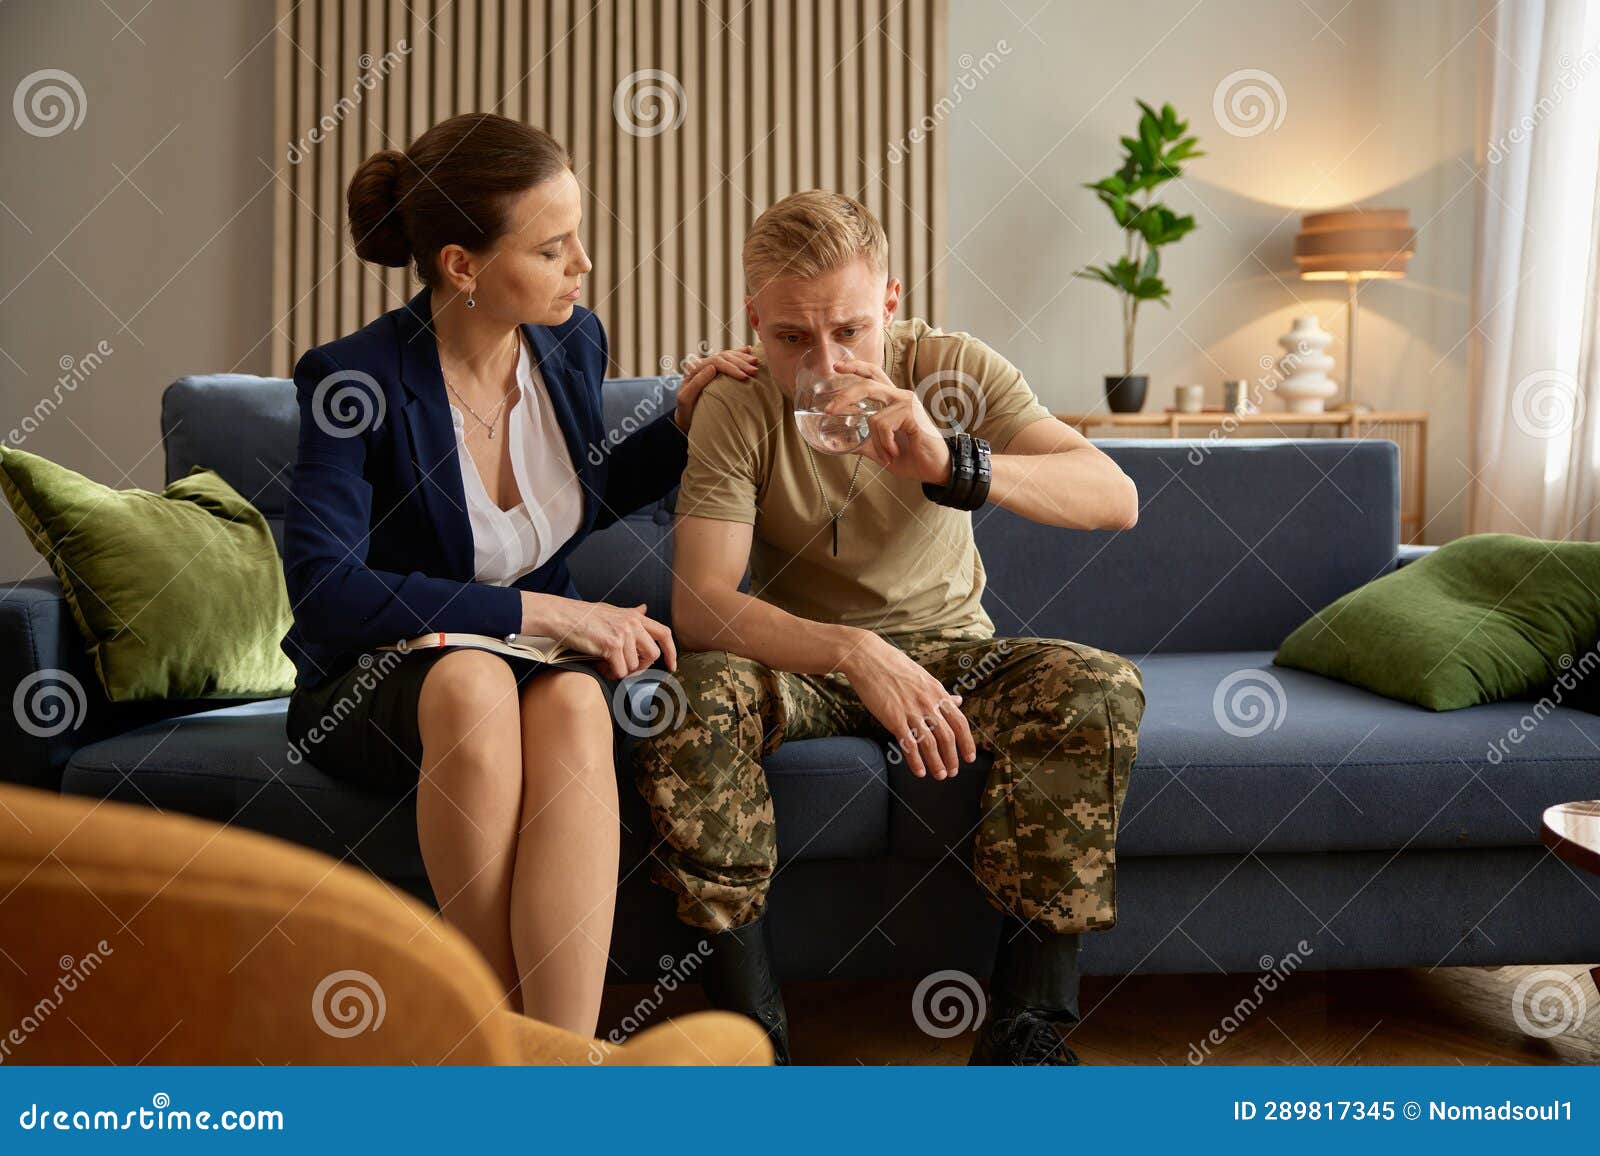 depressed soldier drinking water at psychotherapeutic session